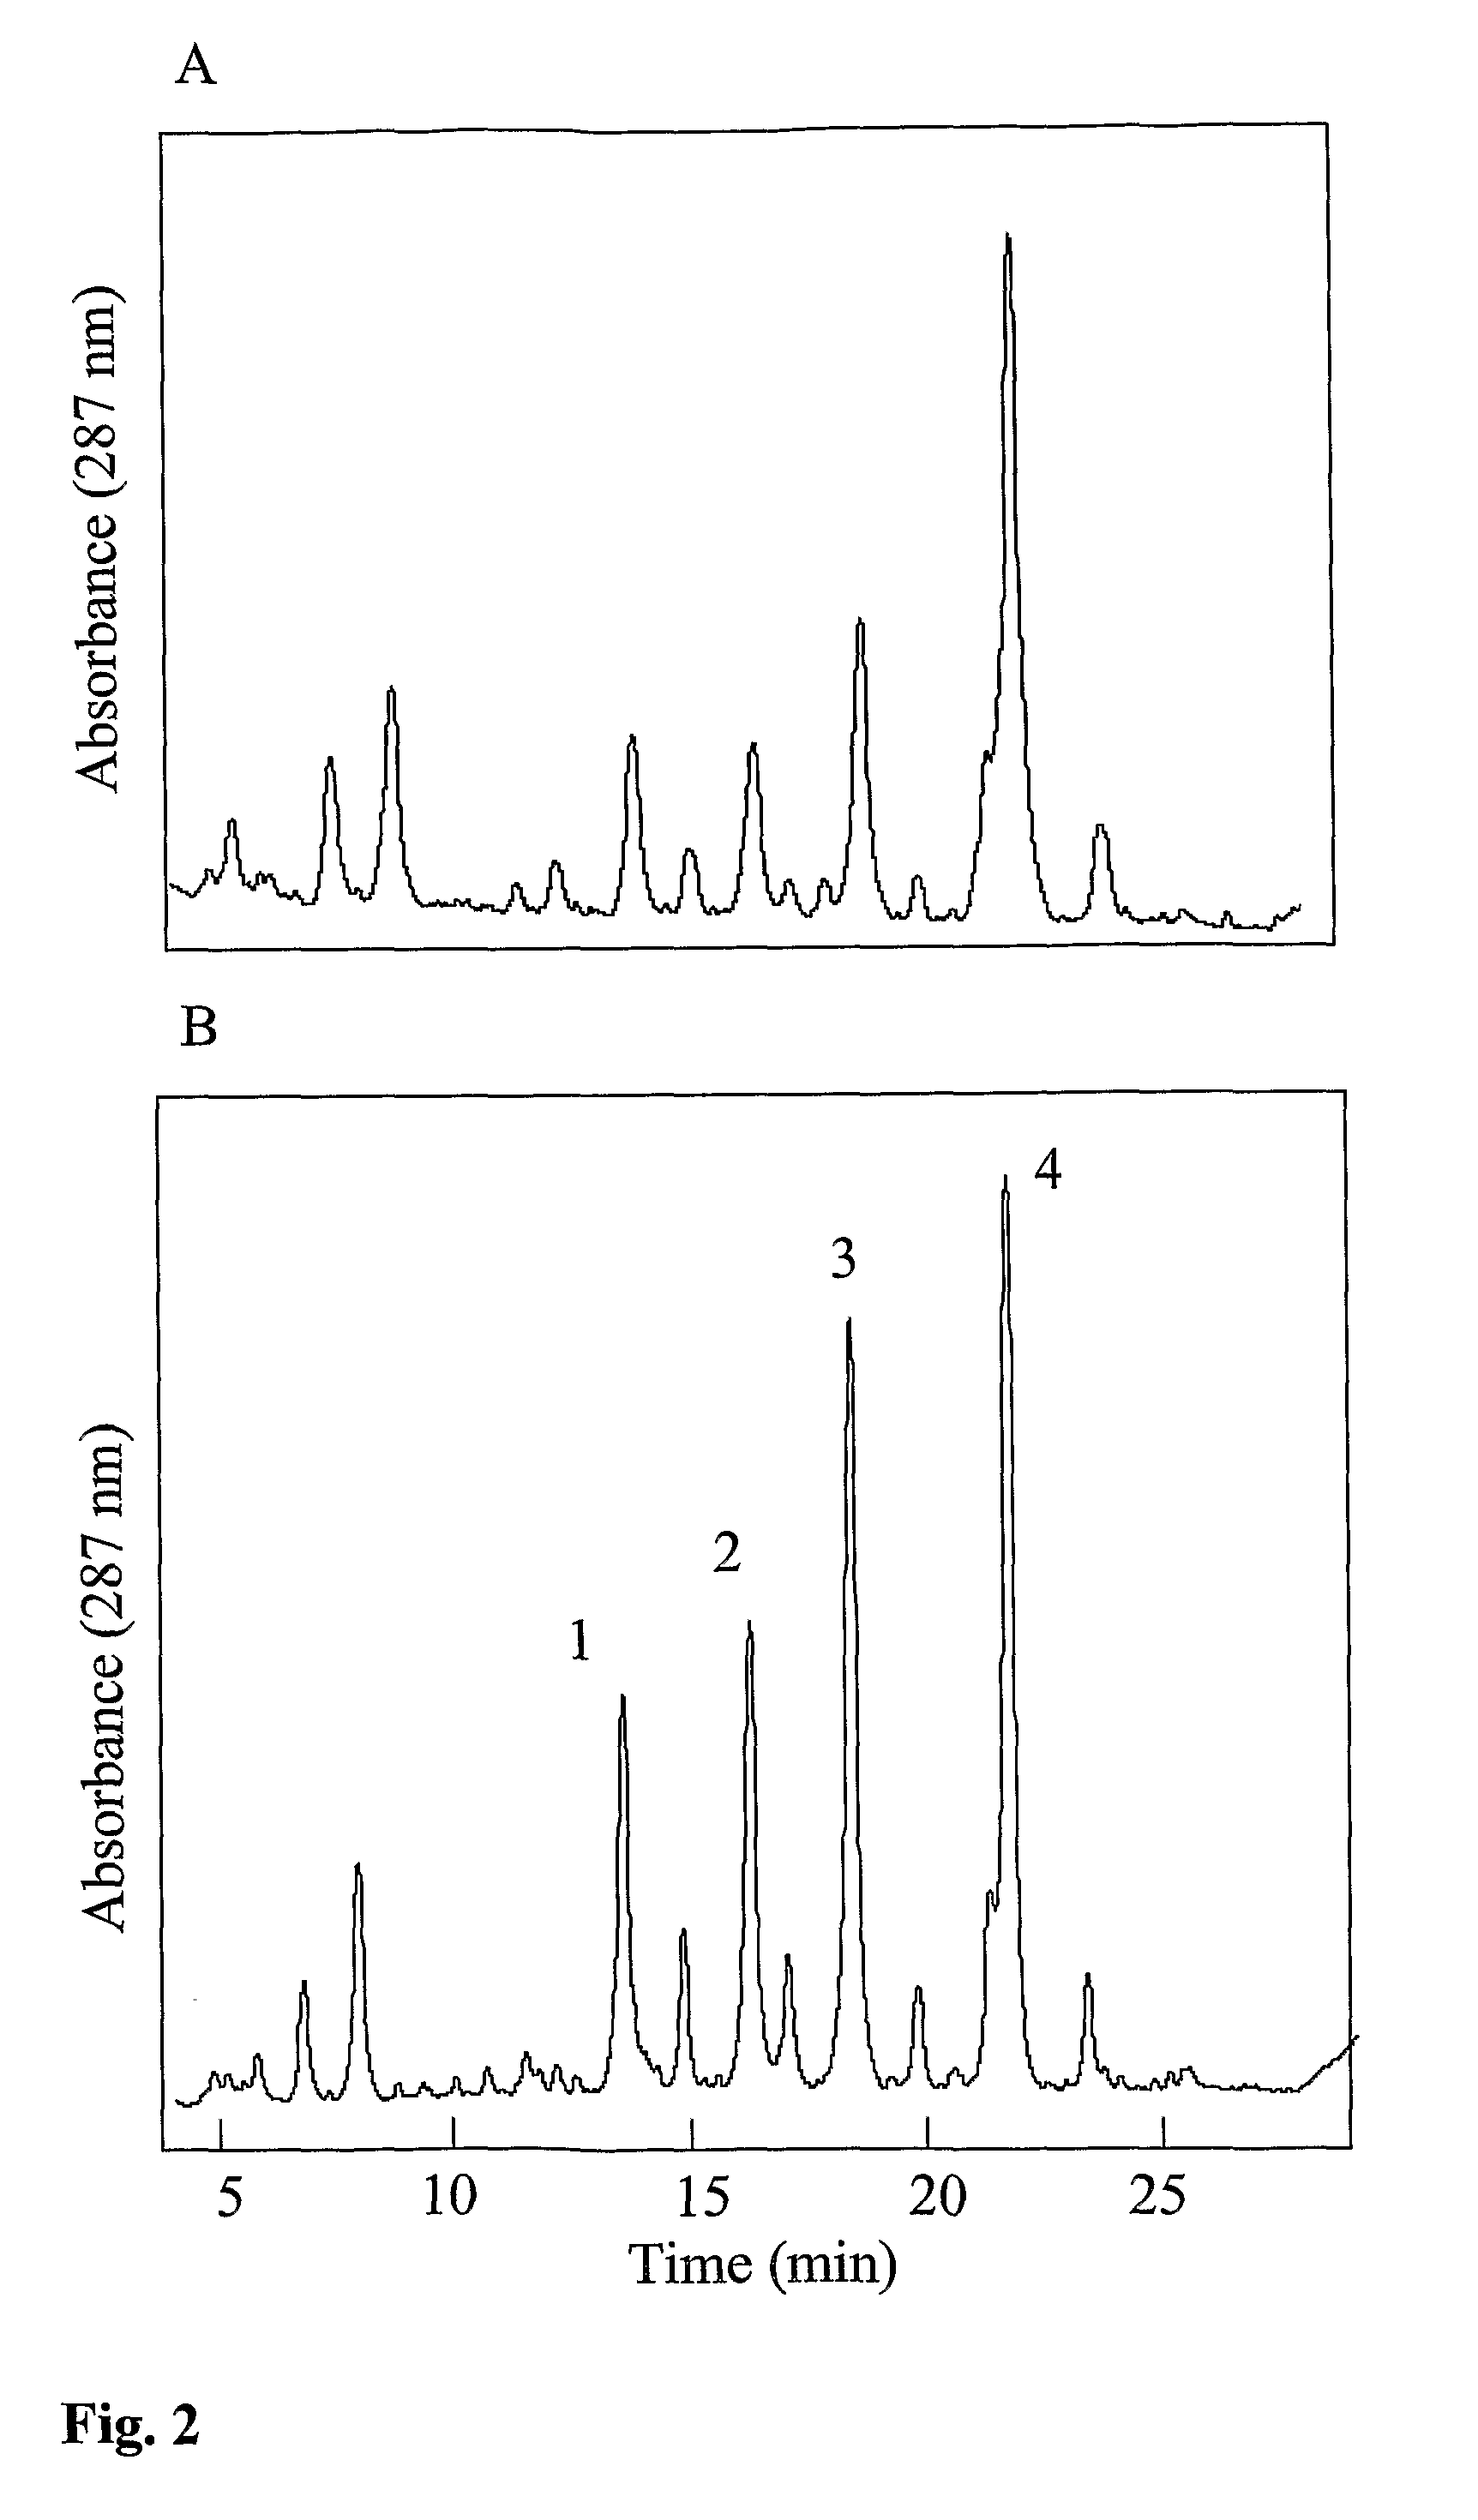 Method and Means Relating to Multiple Herbicide Resistance in Plants